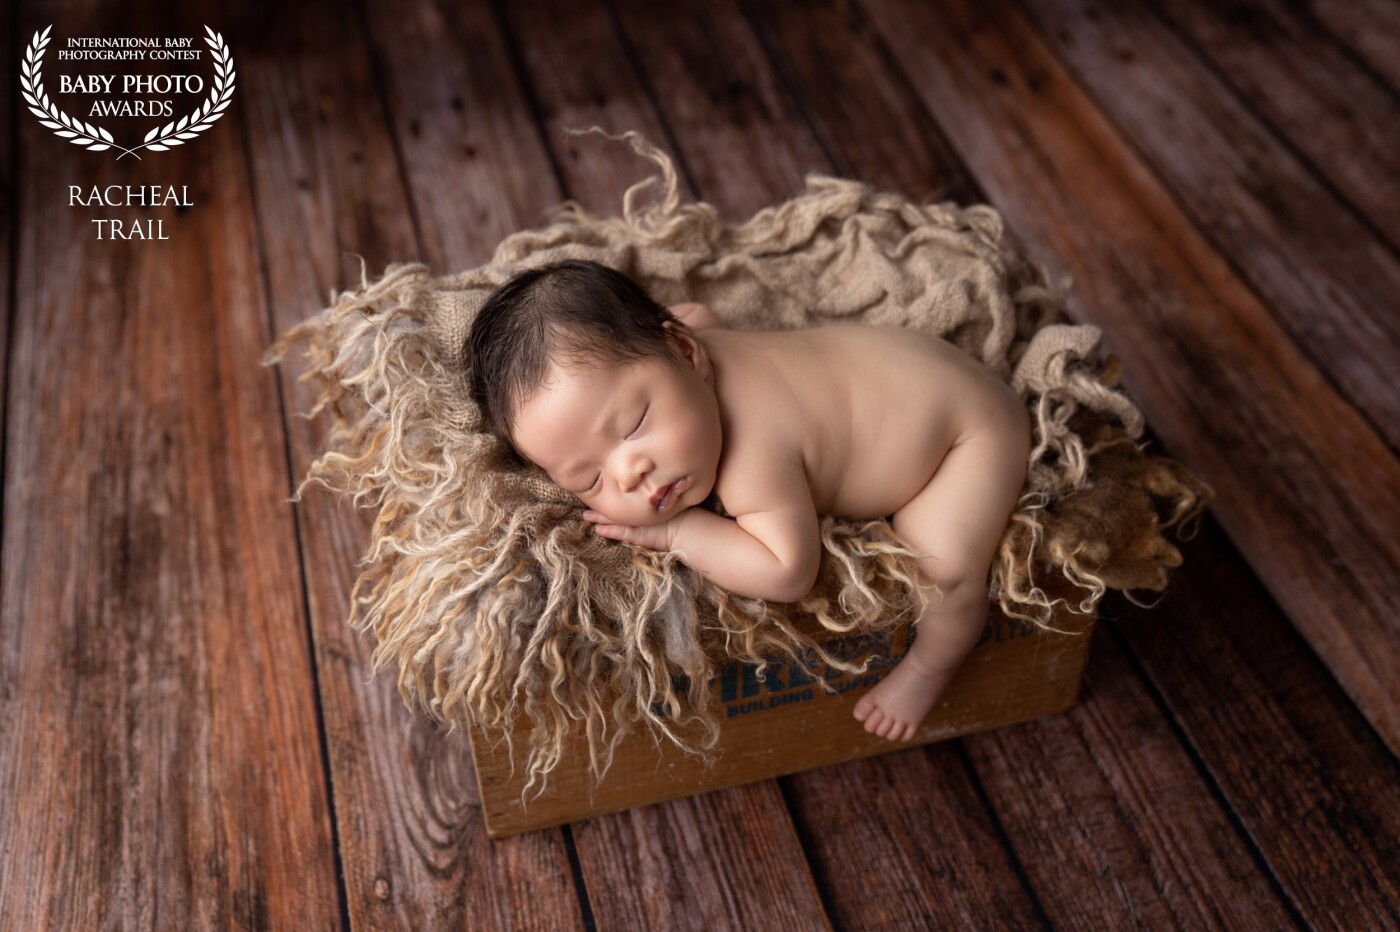 I photographed this wee man when he was 10 days old at his home, but there was a lack of room for a couple of shoots his mum wanted. She brought him to my studio at 6 weeks and we managed to get some fantastic shots.